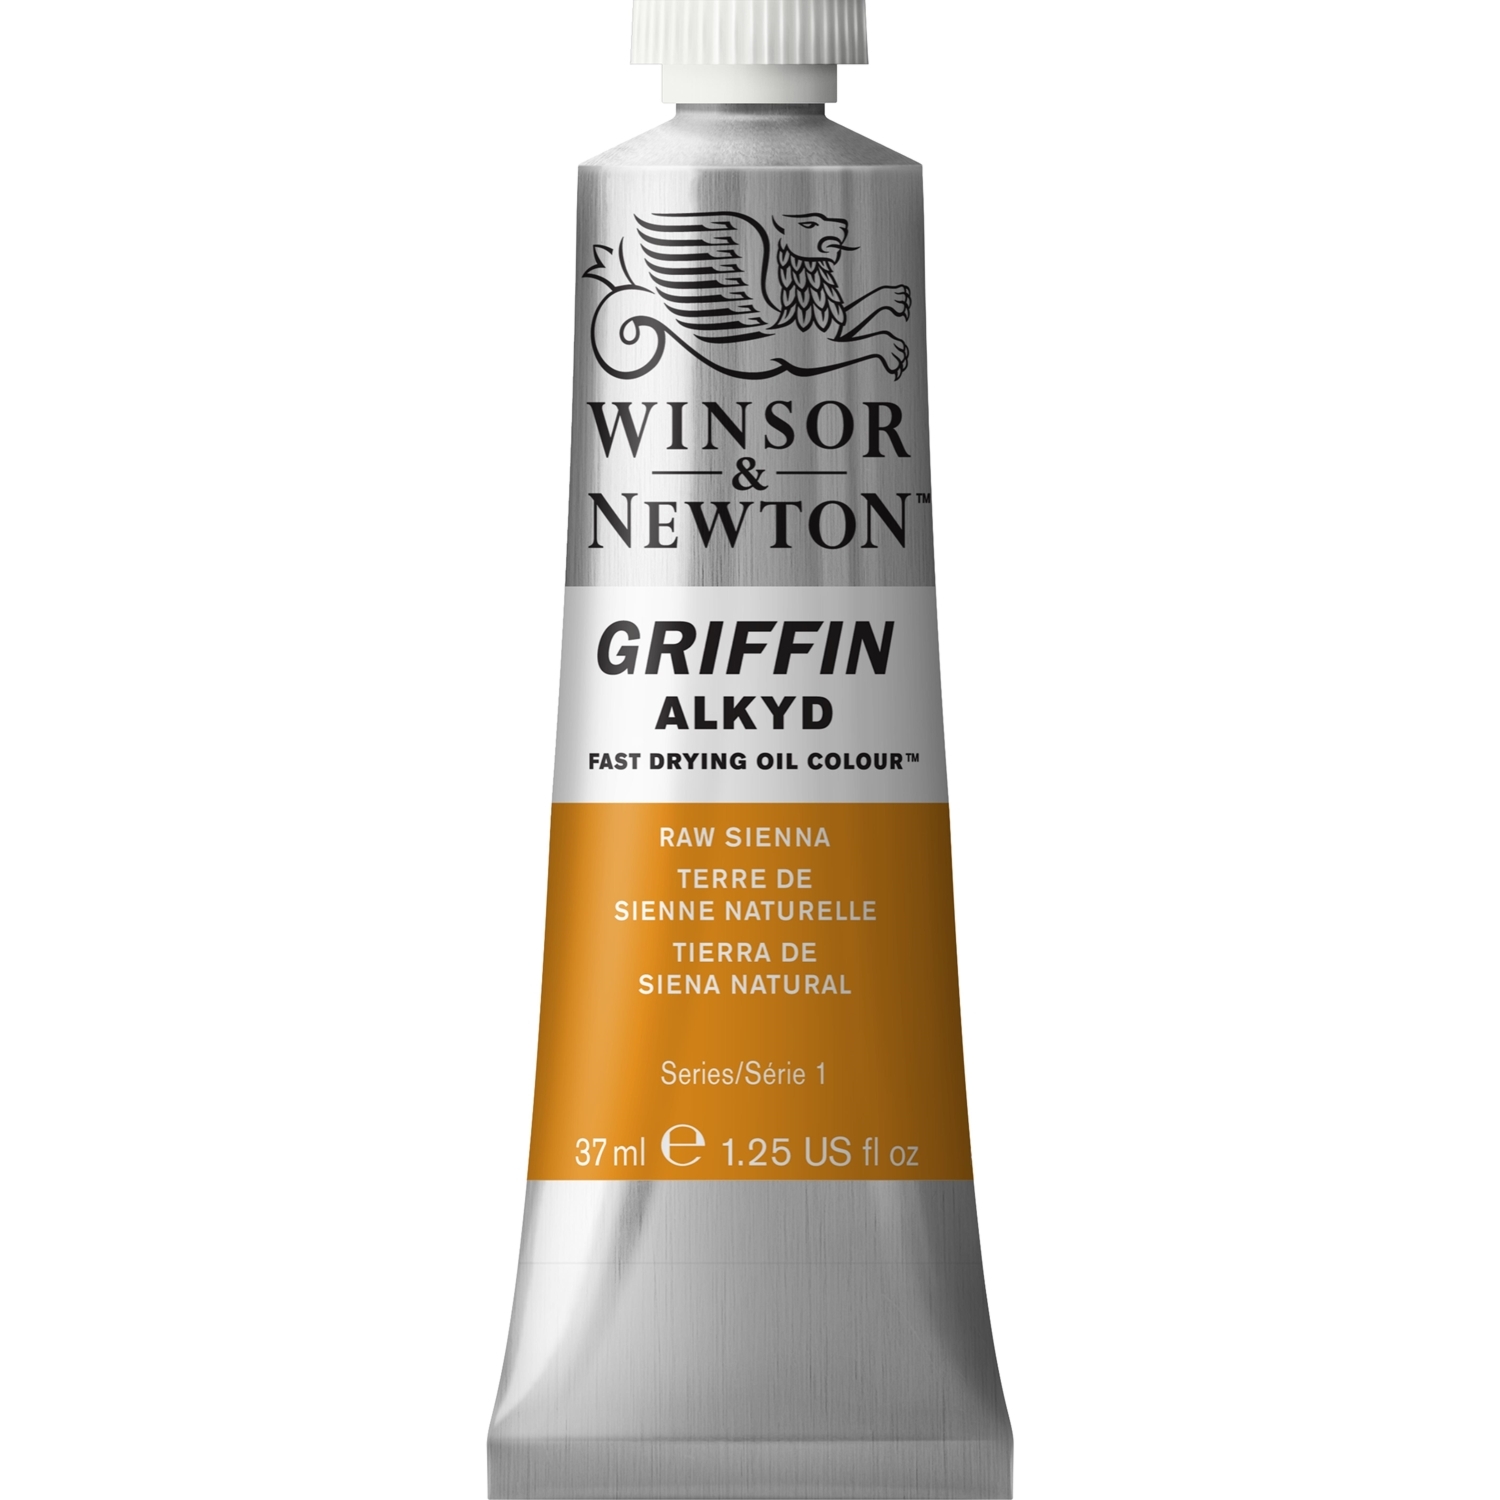 Winsor and Newton Griffin Alkyd Oil Colour - Raw Sienna Image 1